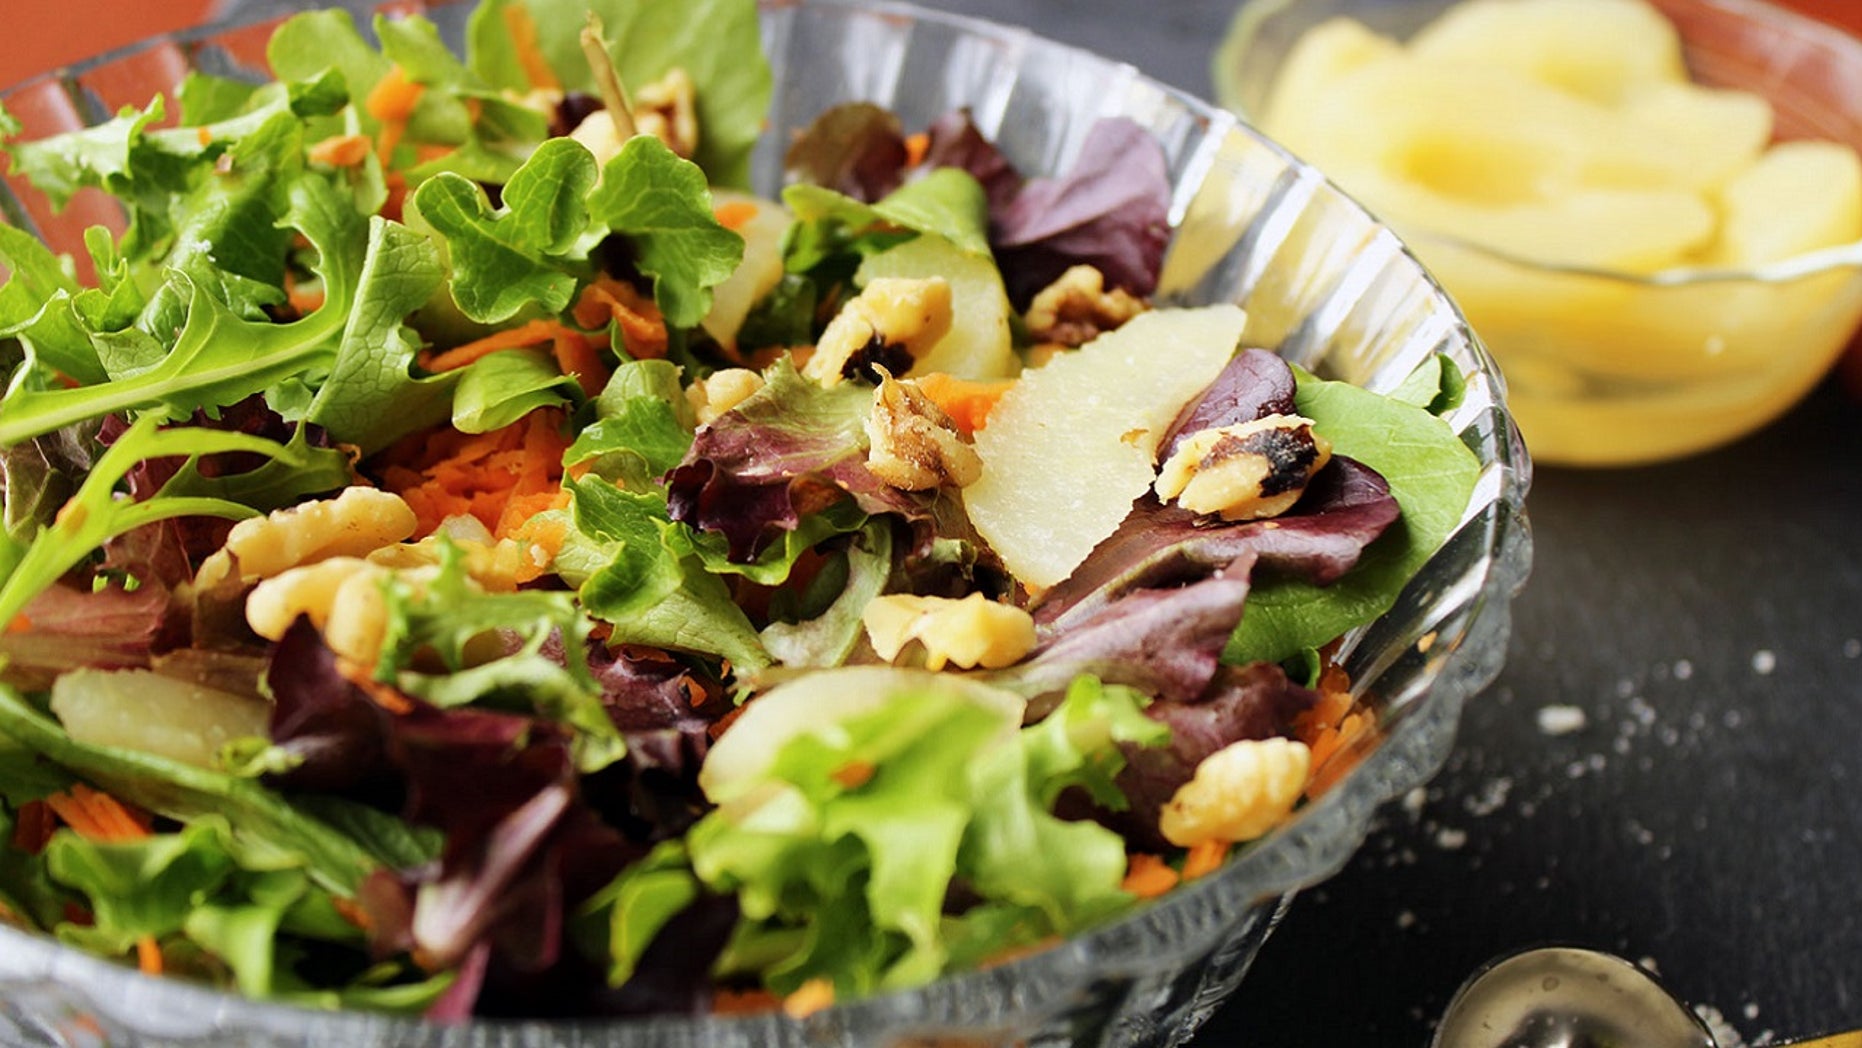 New York City sees massive lines for salads after ‘eat healthy’ New Year